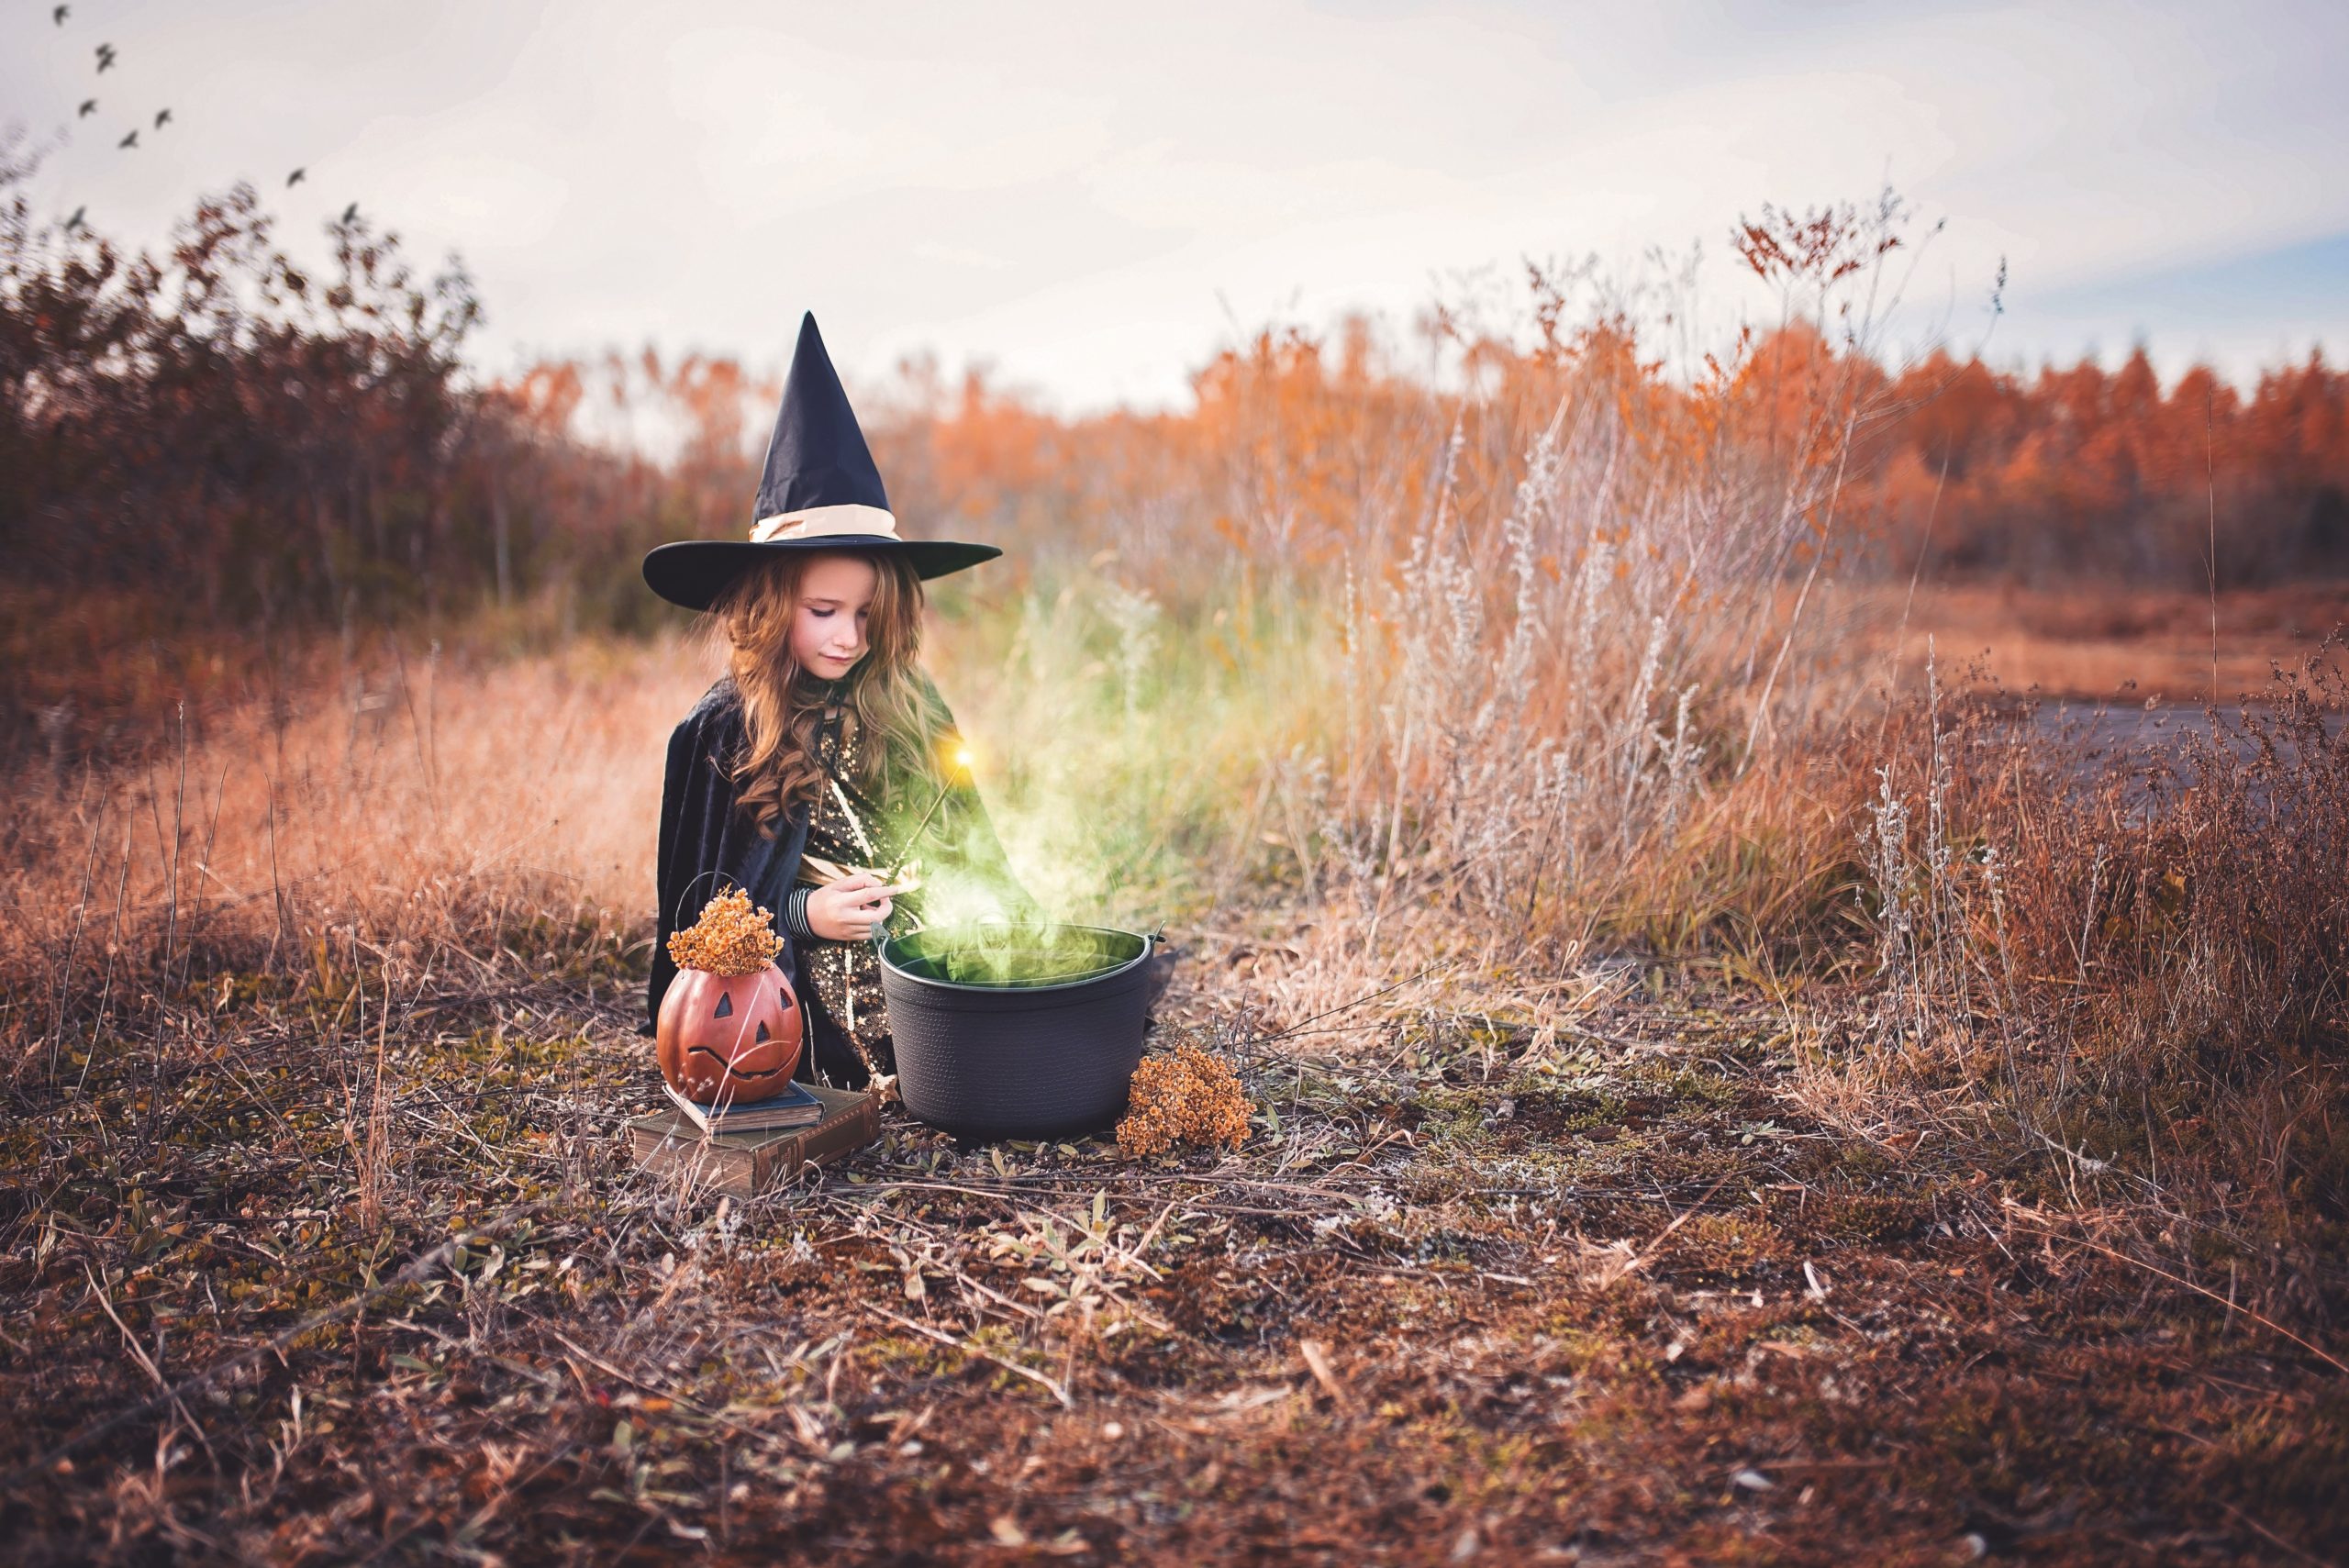 Kids and Eczema and Halloween, How to Celebrate Halloween without an eczema flare